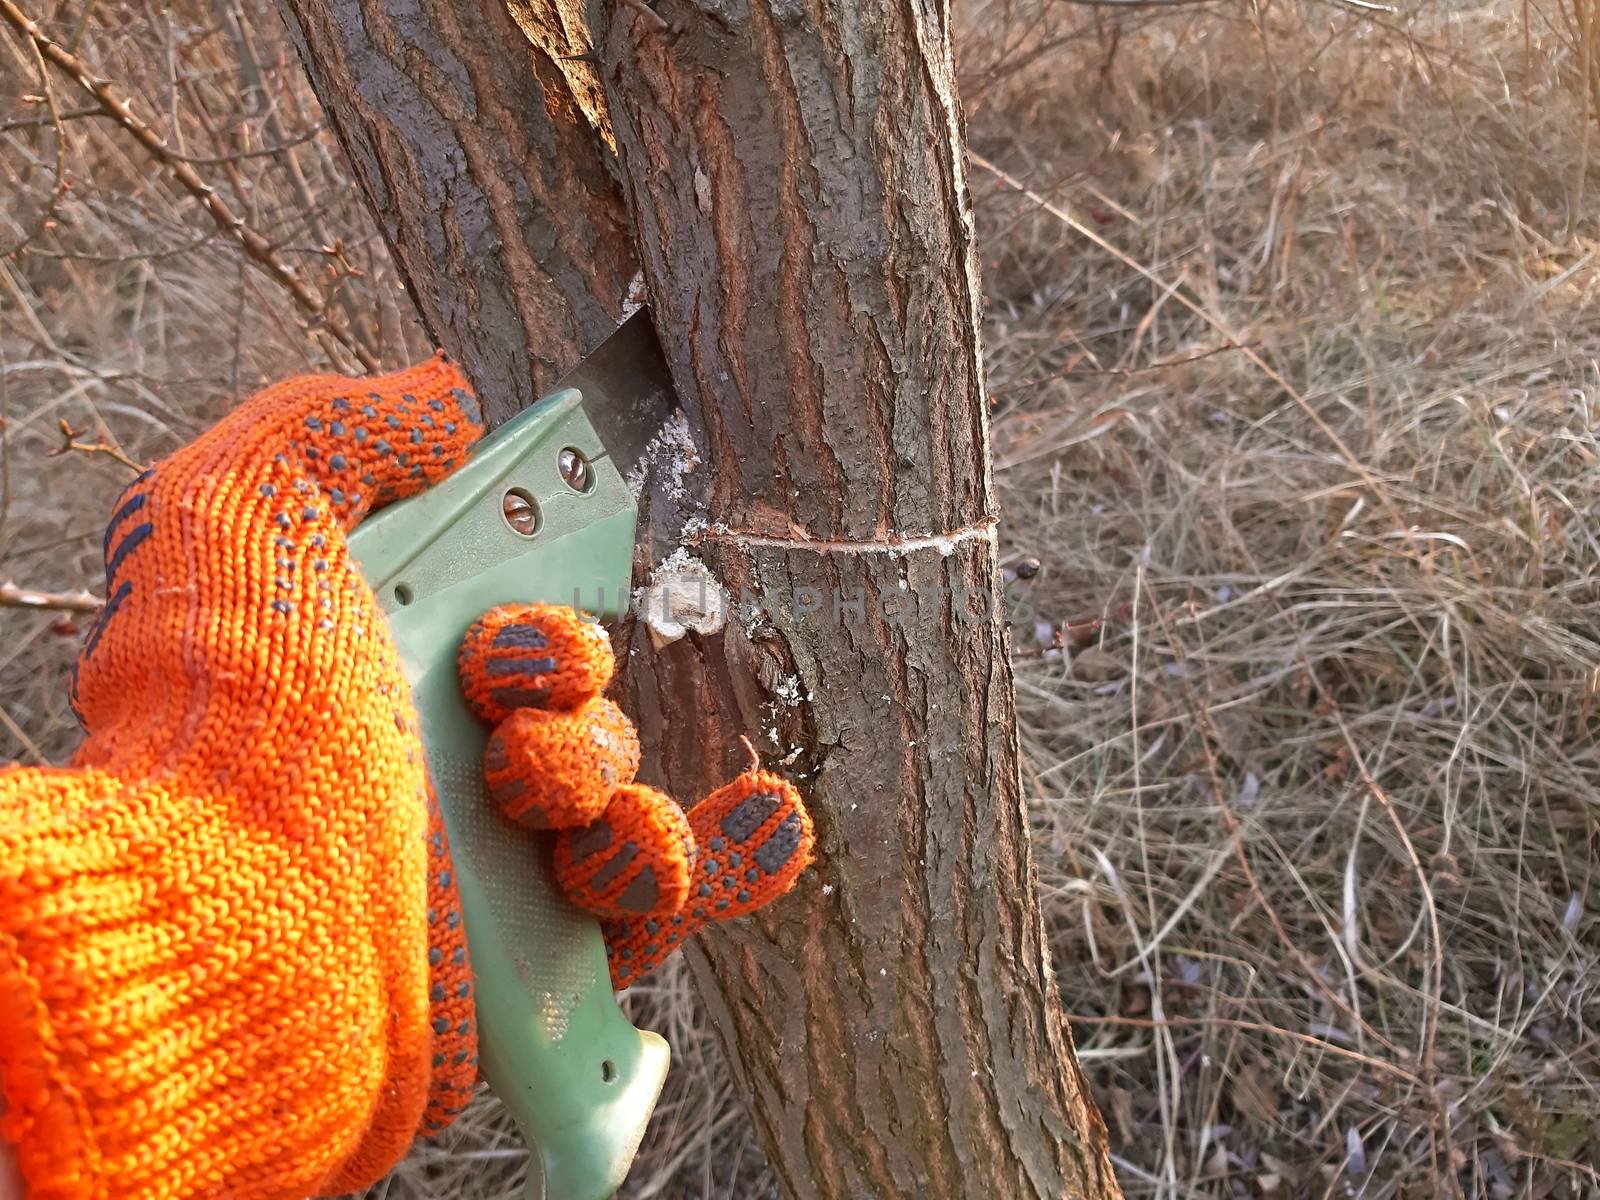 Cutting young tree with the saw. Cutting unnecessary branches by Mindru